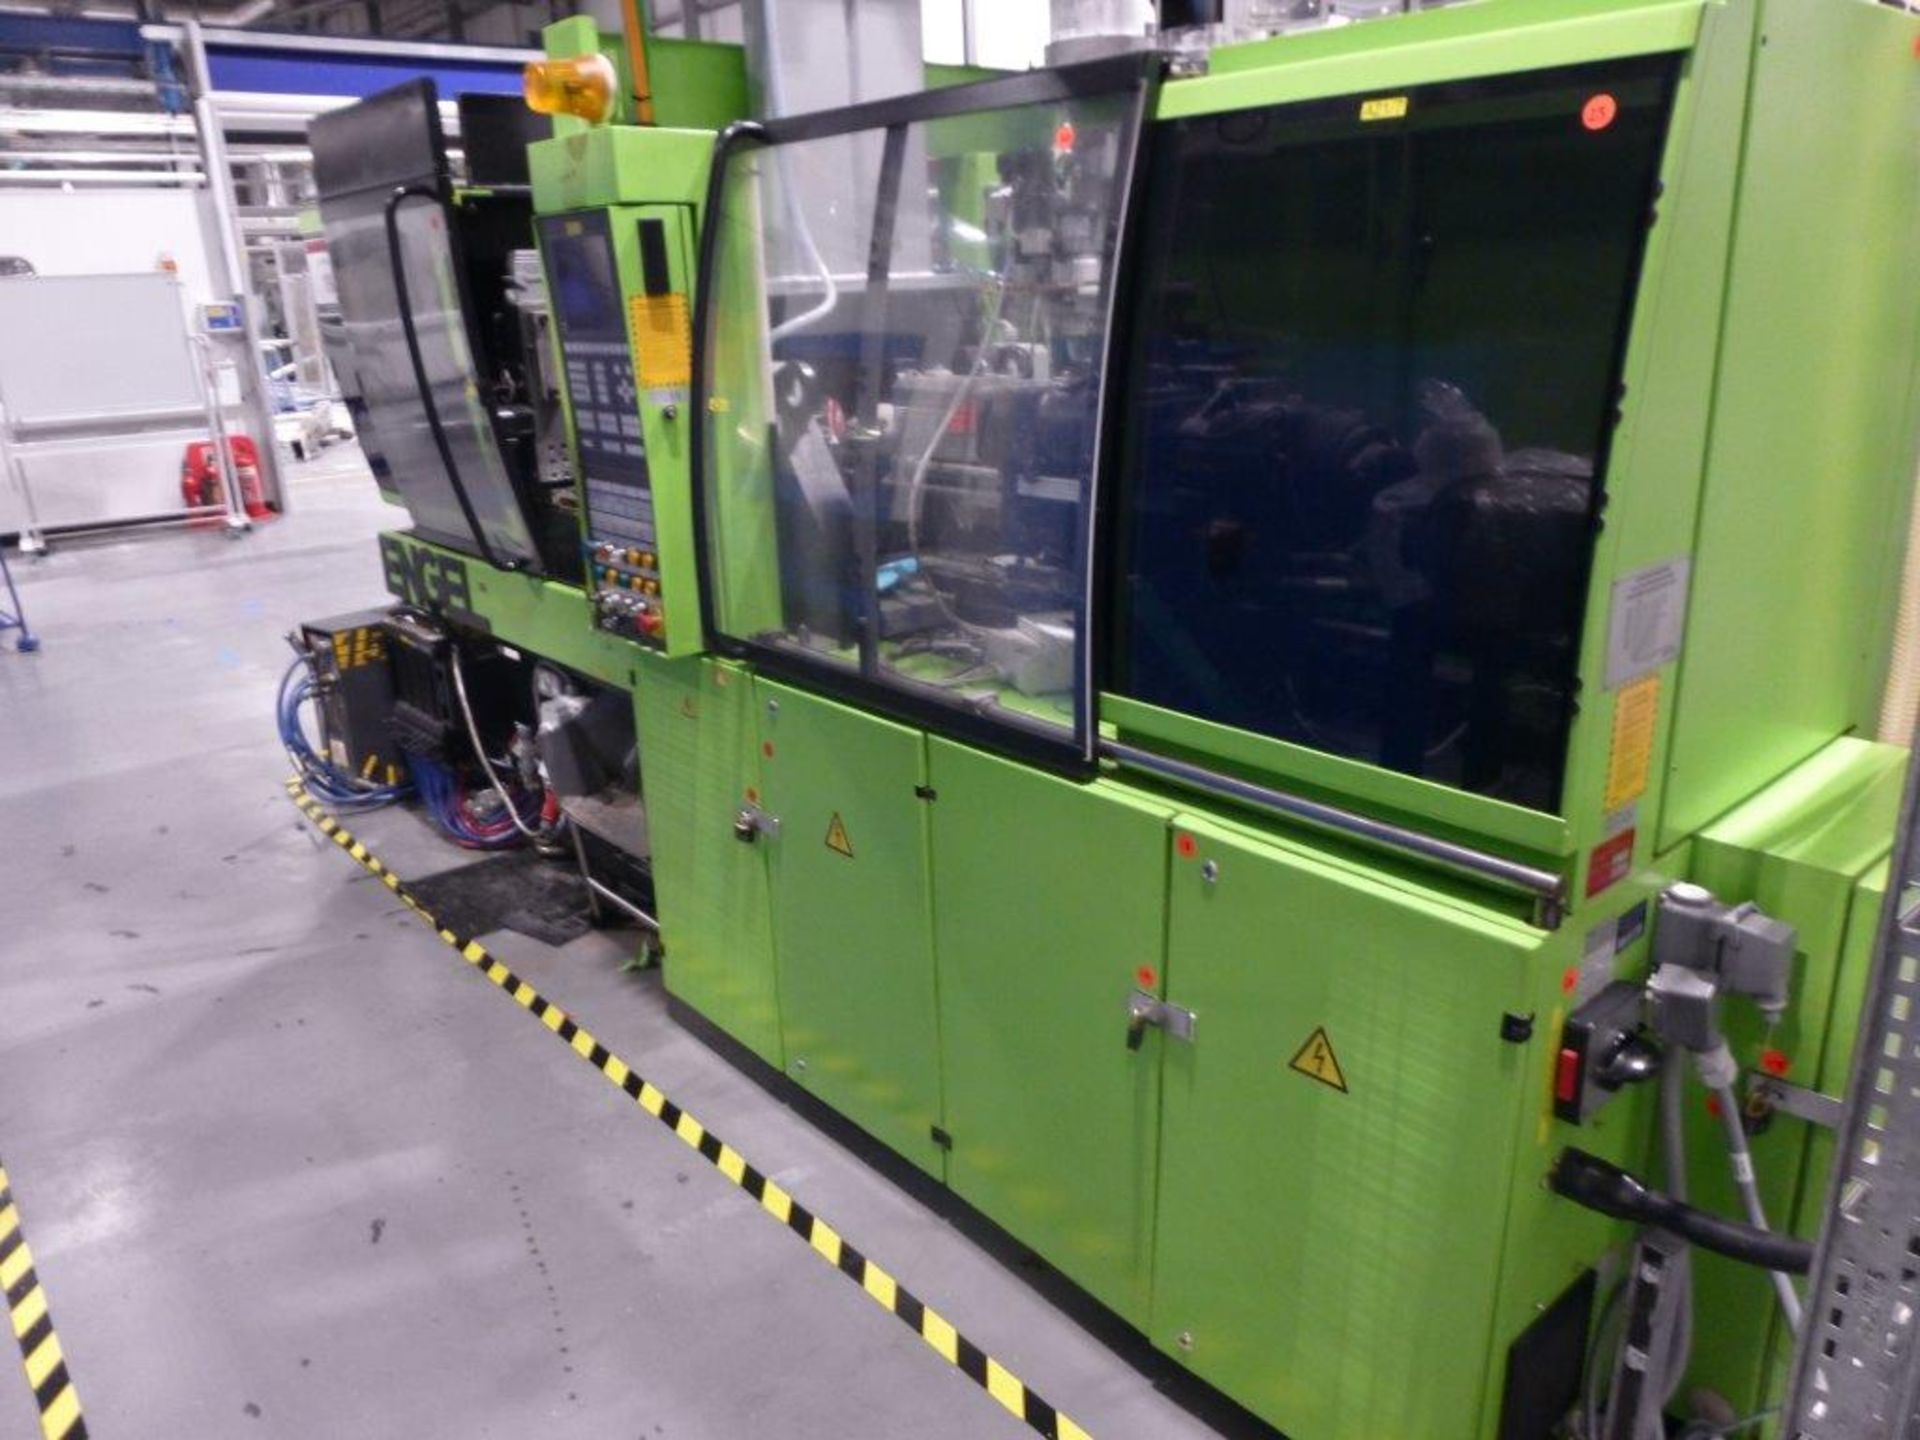 Engel ES200/50HL CNC Plastic Injection Moulding Machine Serial No. 31803 (1997) with DBTB - Image 2 of 7